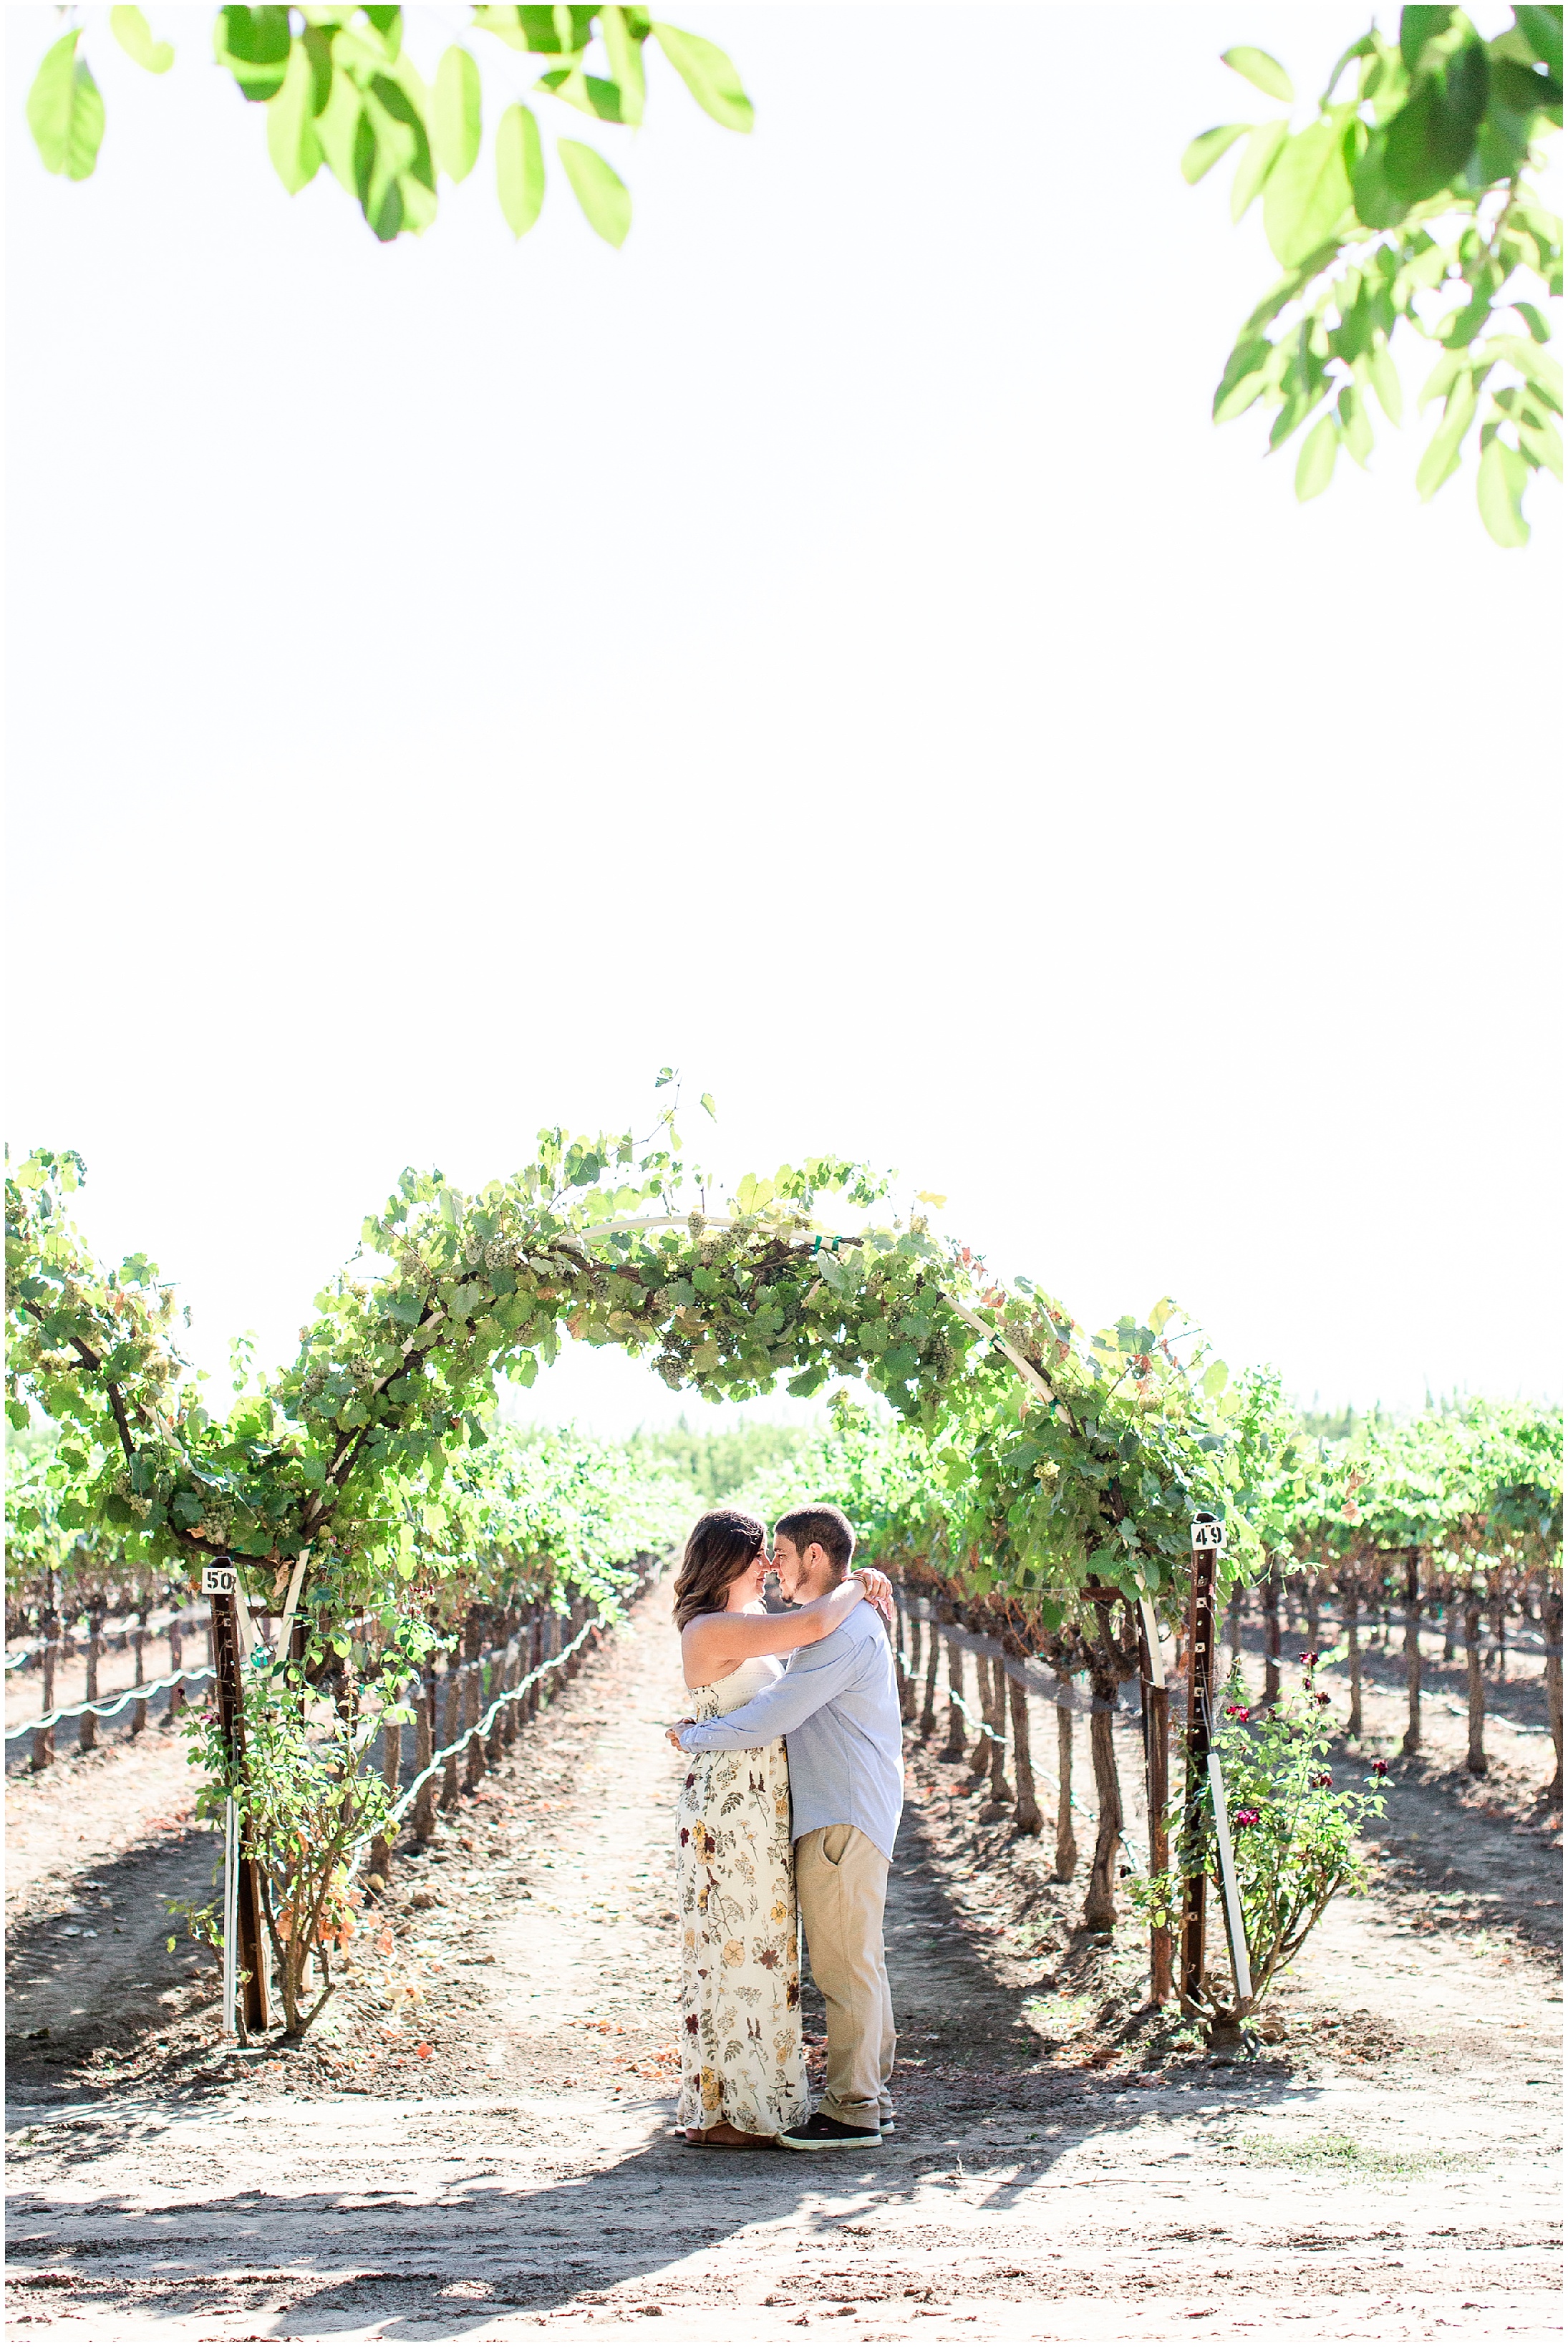 New Clairvaux Vineyard Arch Engagement Session Diana + Miguel